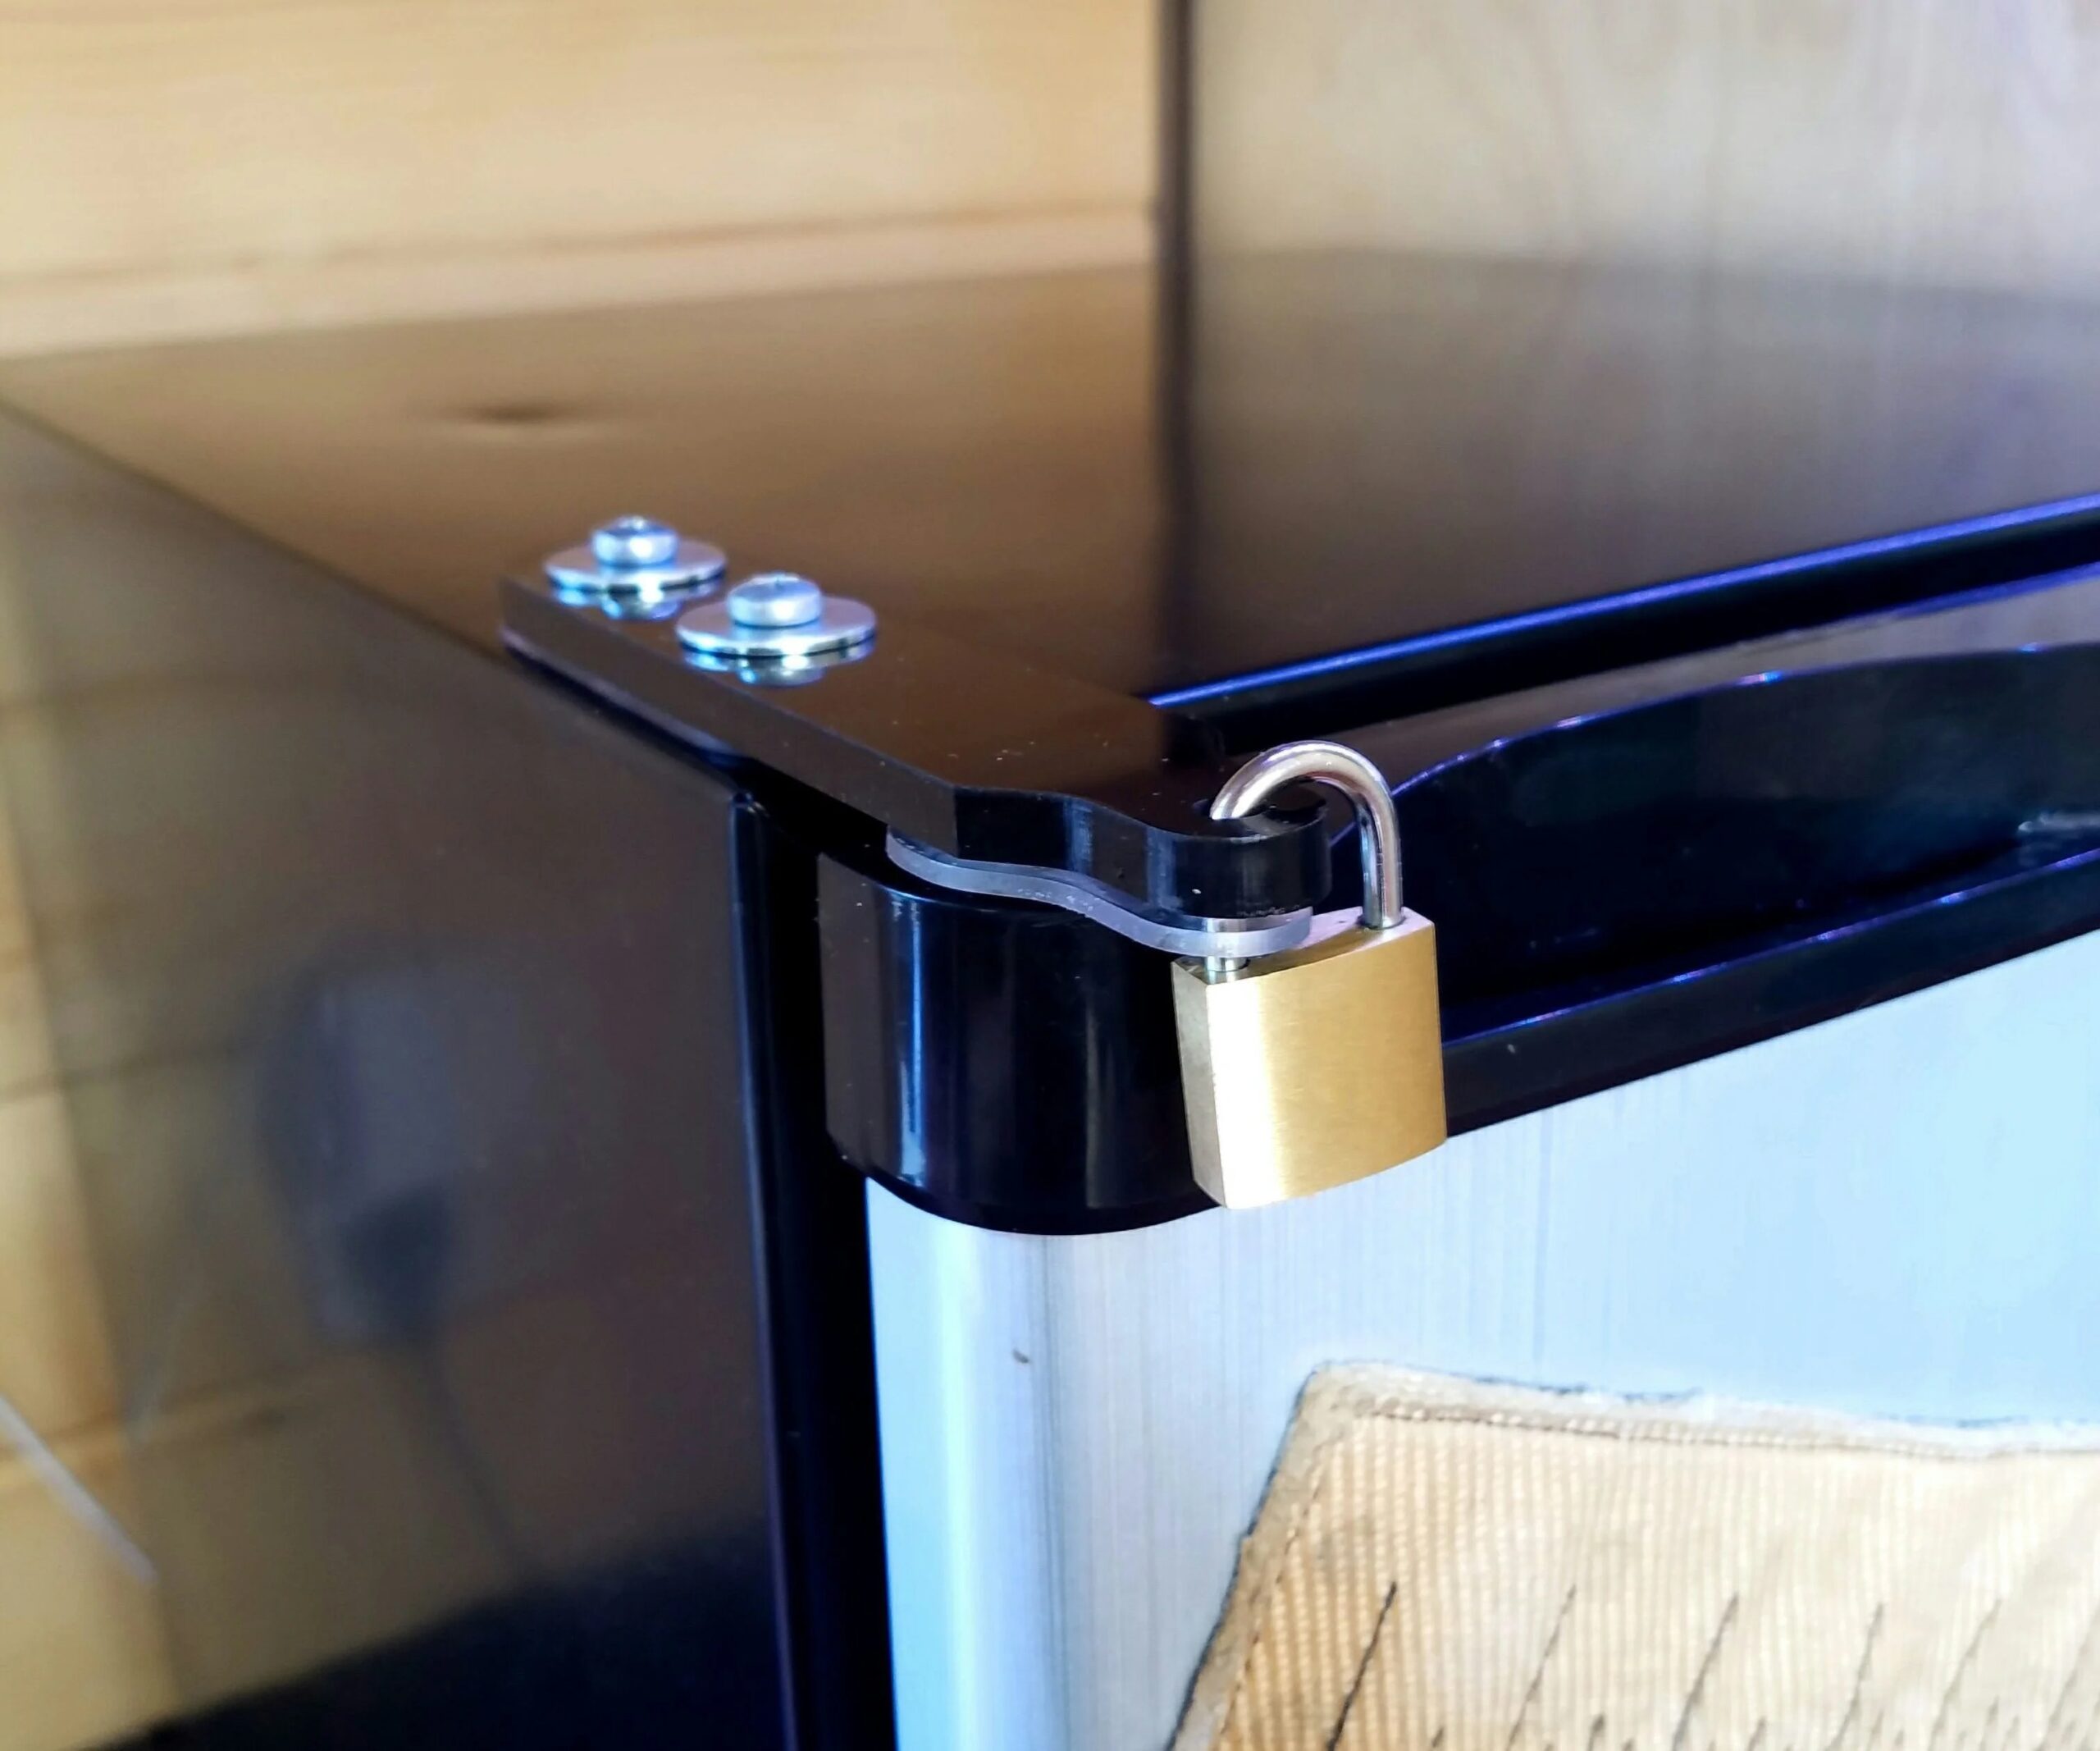 How to put a lock on a mini refrigerator?